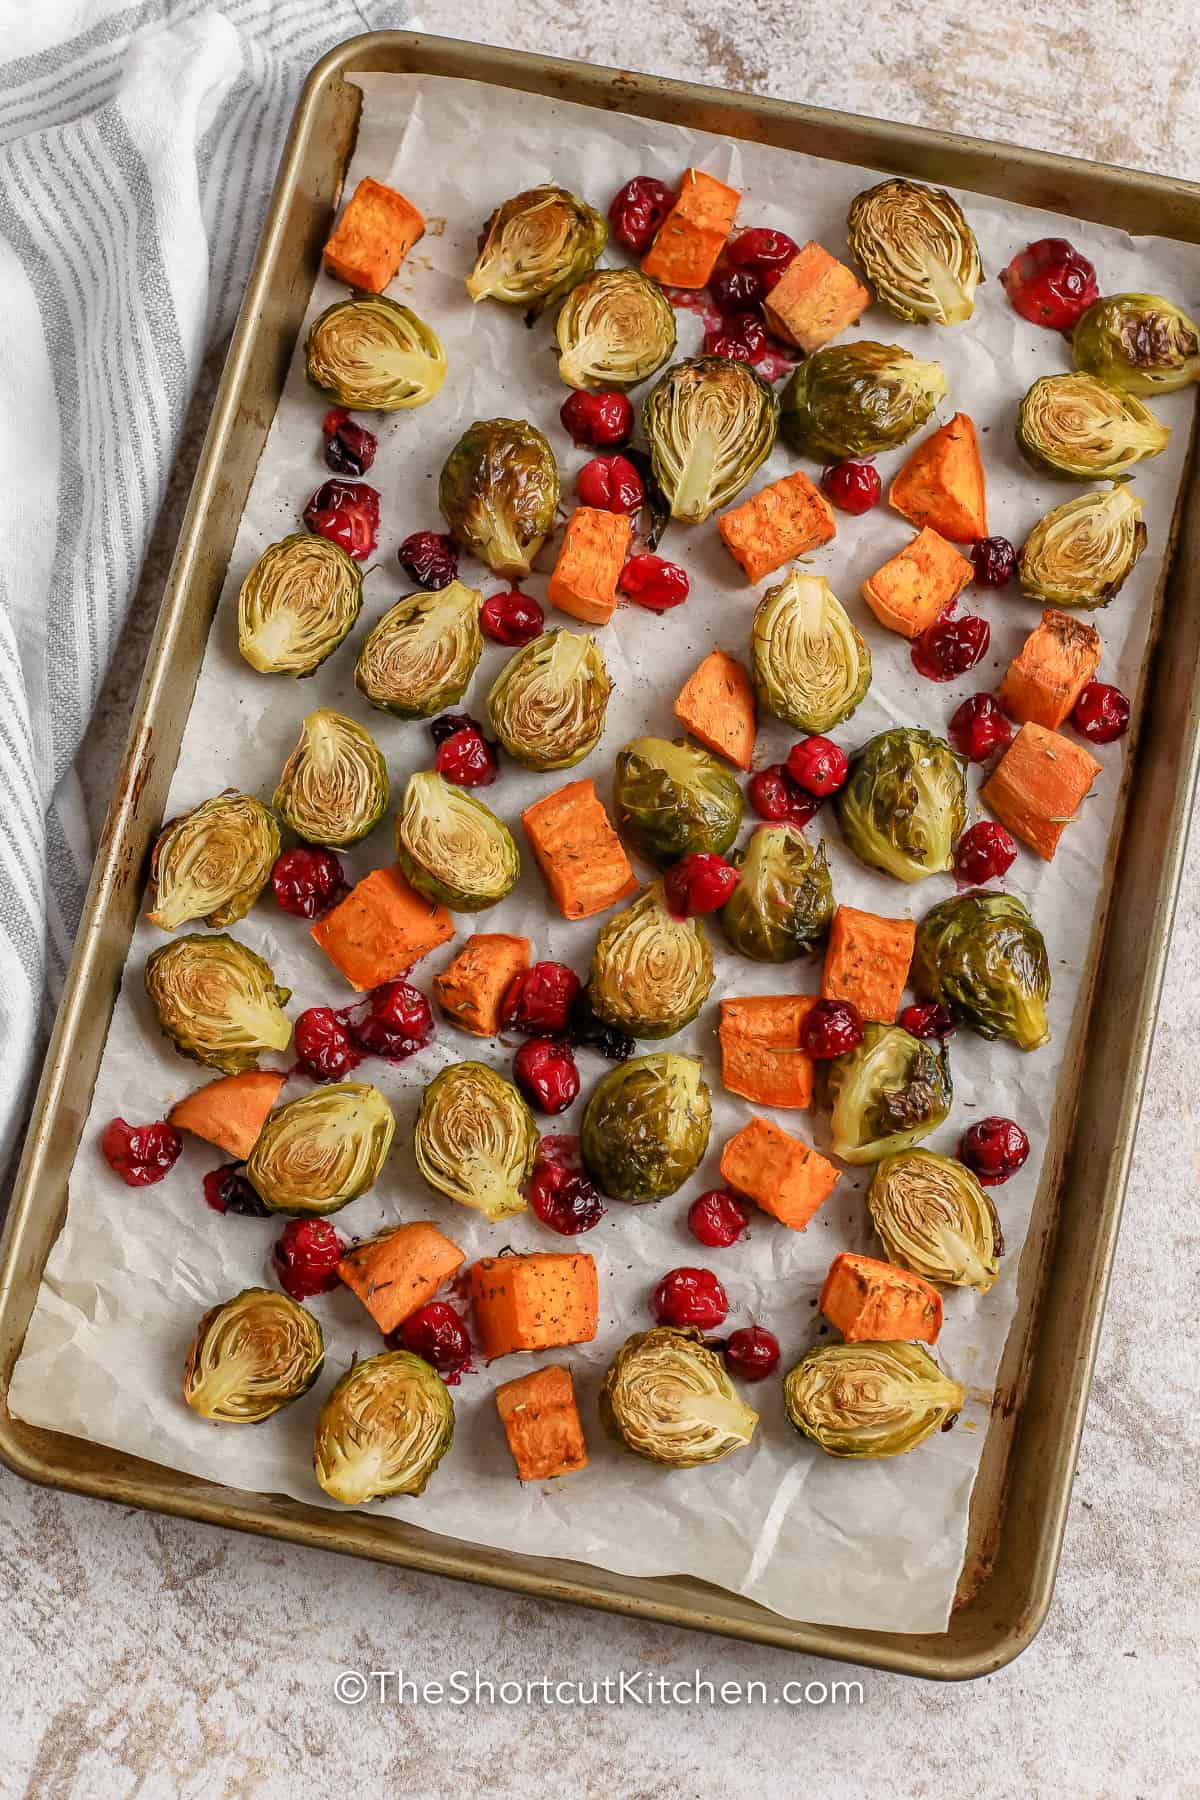 Roasted Vegetables on a sheet pan